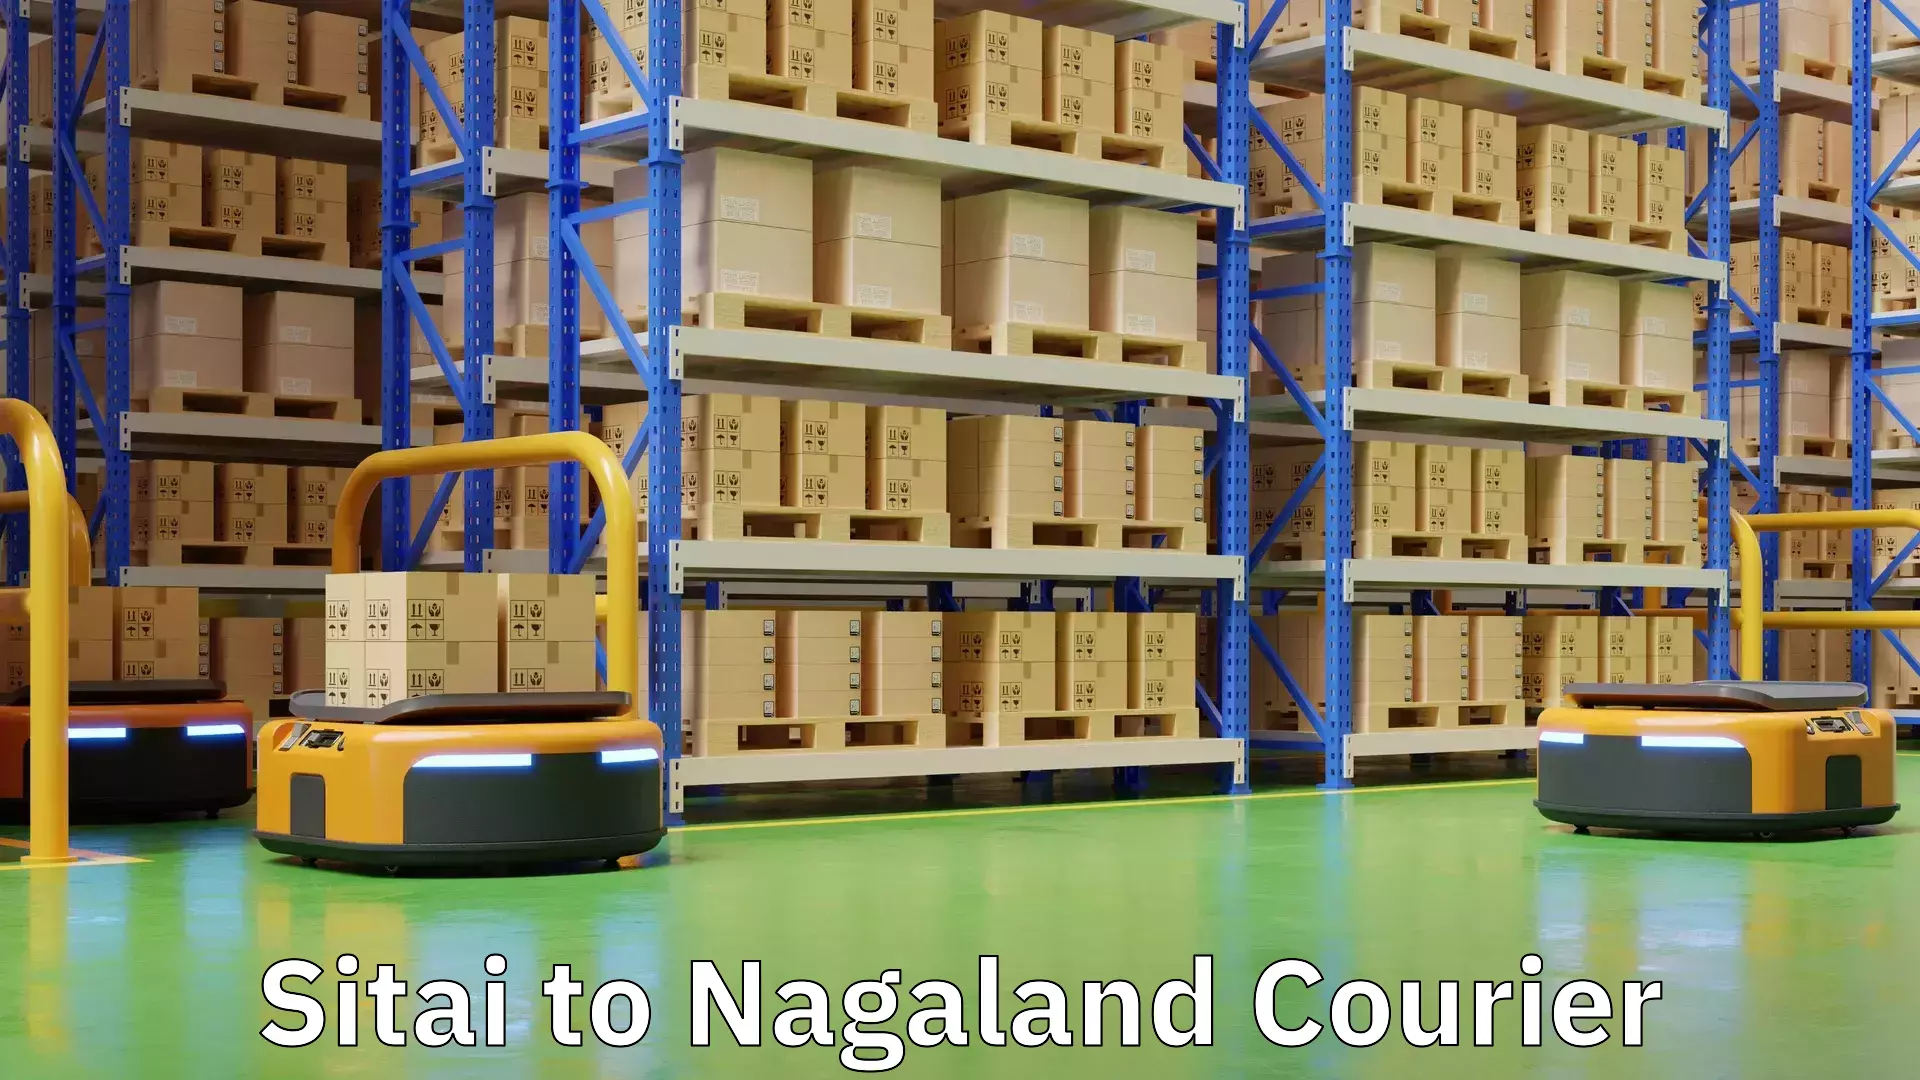 Efficient package consolidation Sitai to Nagaland